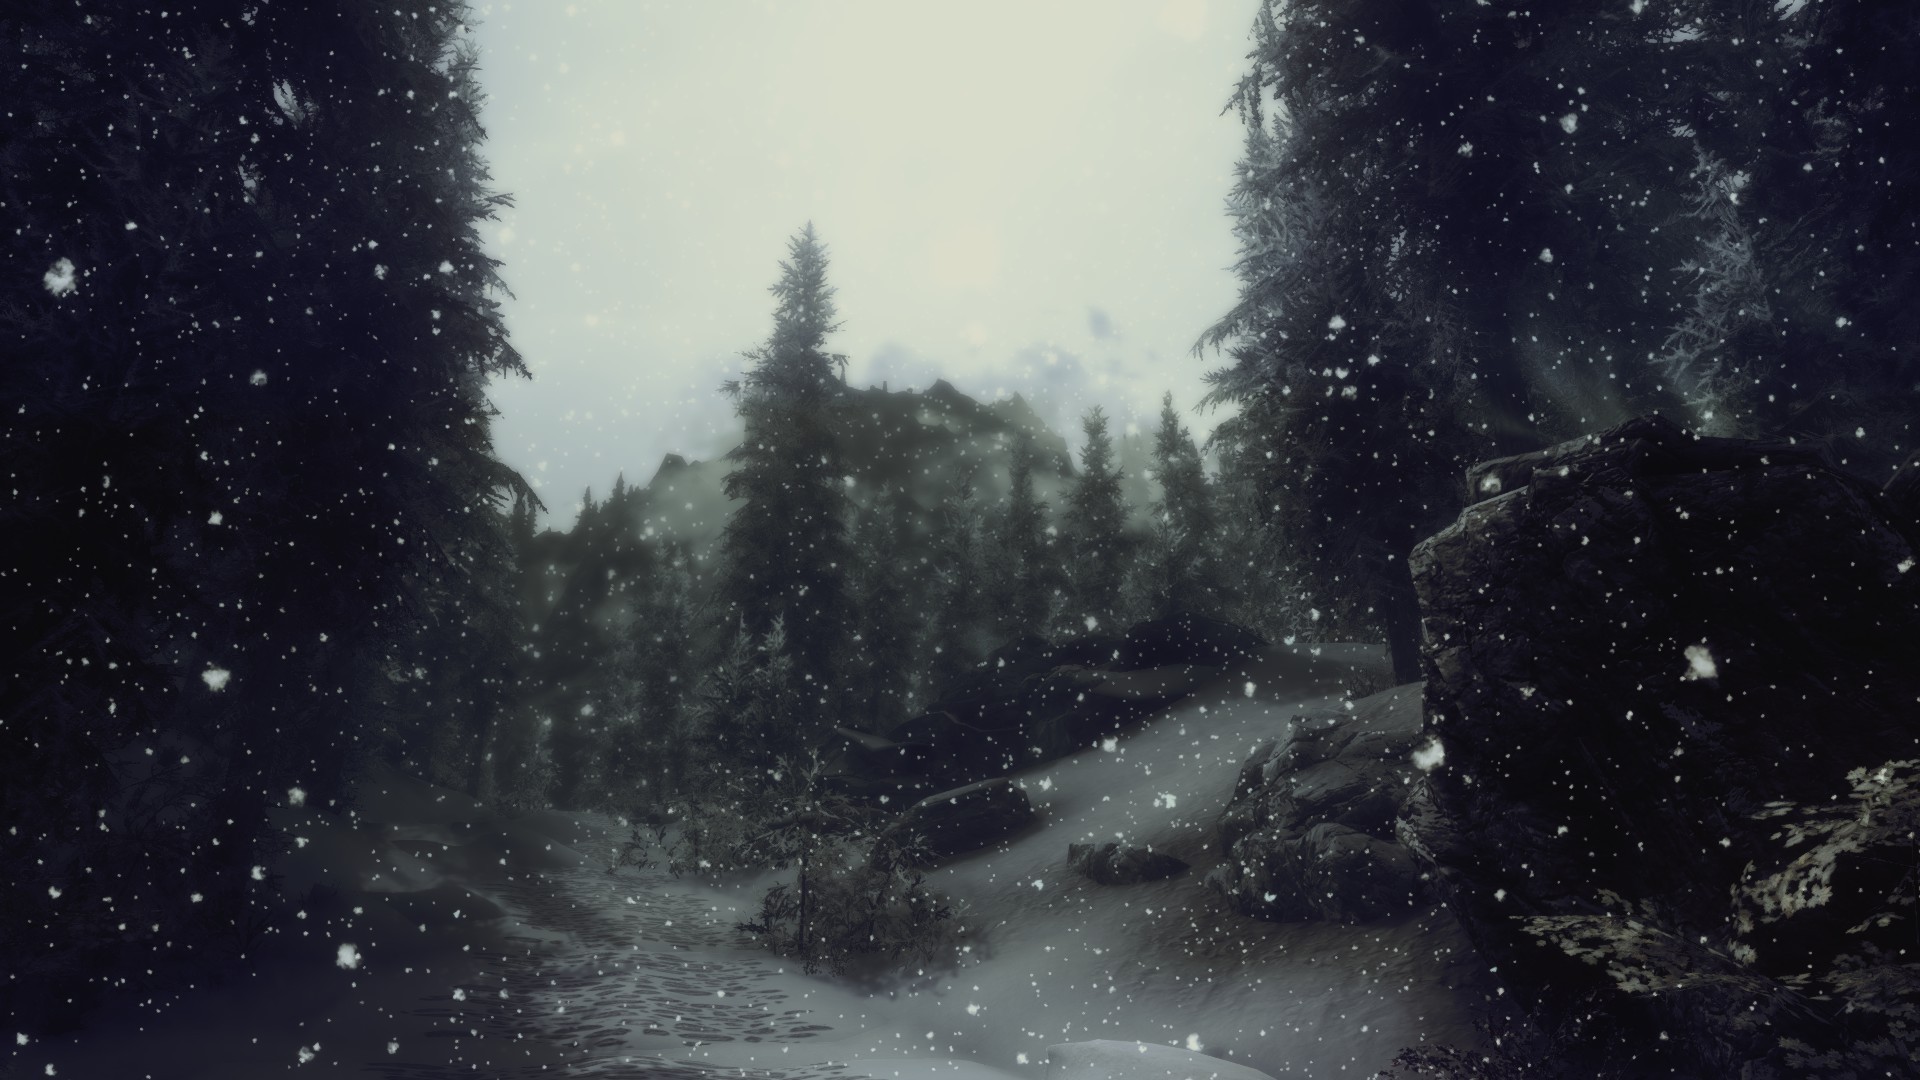 General 1920x1080 artwork nature snow trees The Elder Scrolls V: Skyrim video games sky forest clearing forest road winter PC gaming RPG